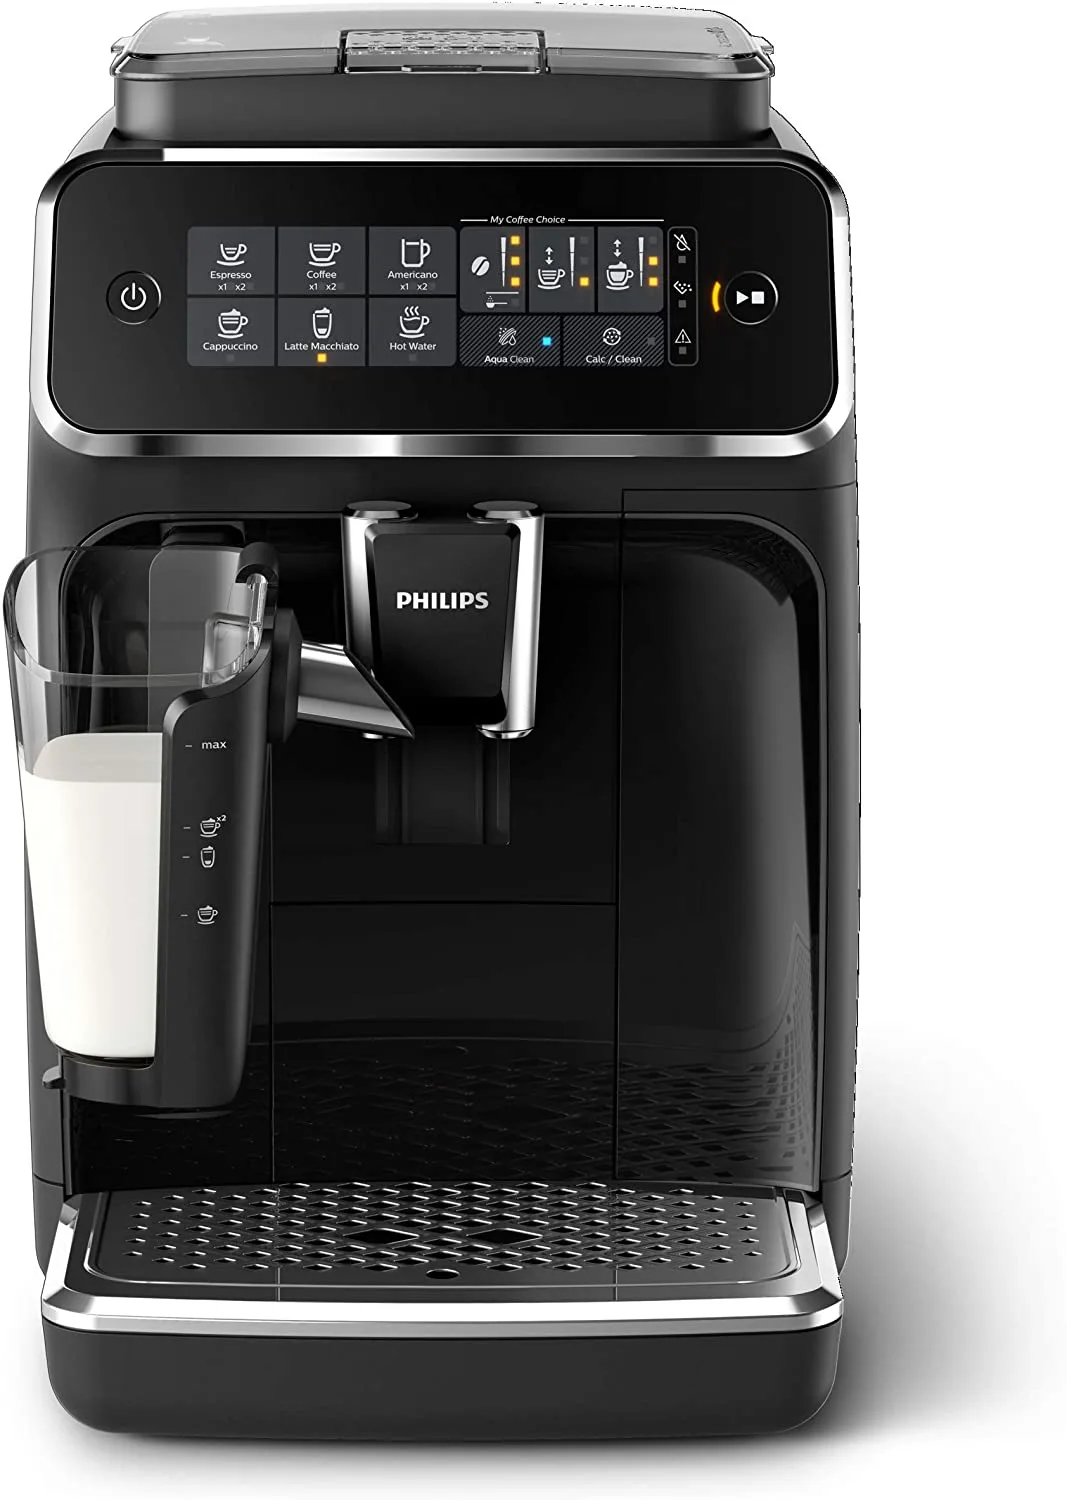 Philips 3200 LatteGo Series Fully Automatic Espresso Machine Reviews